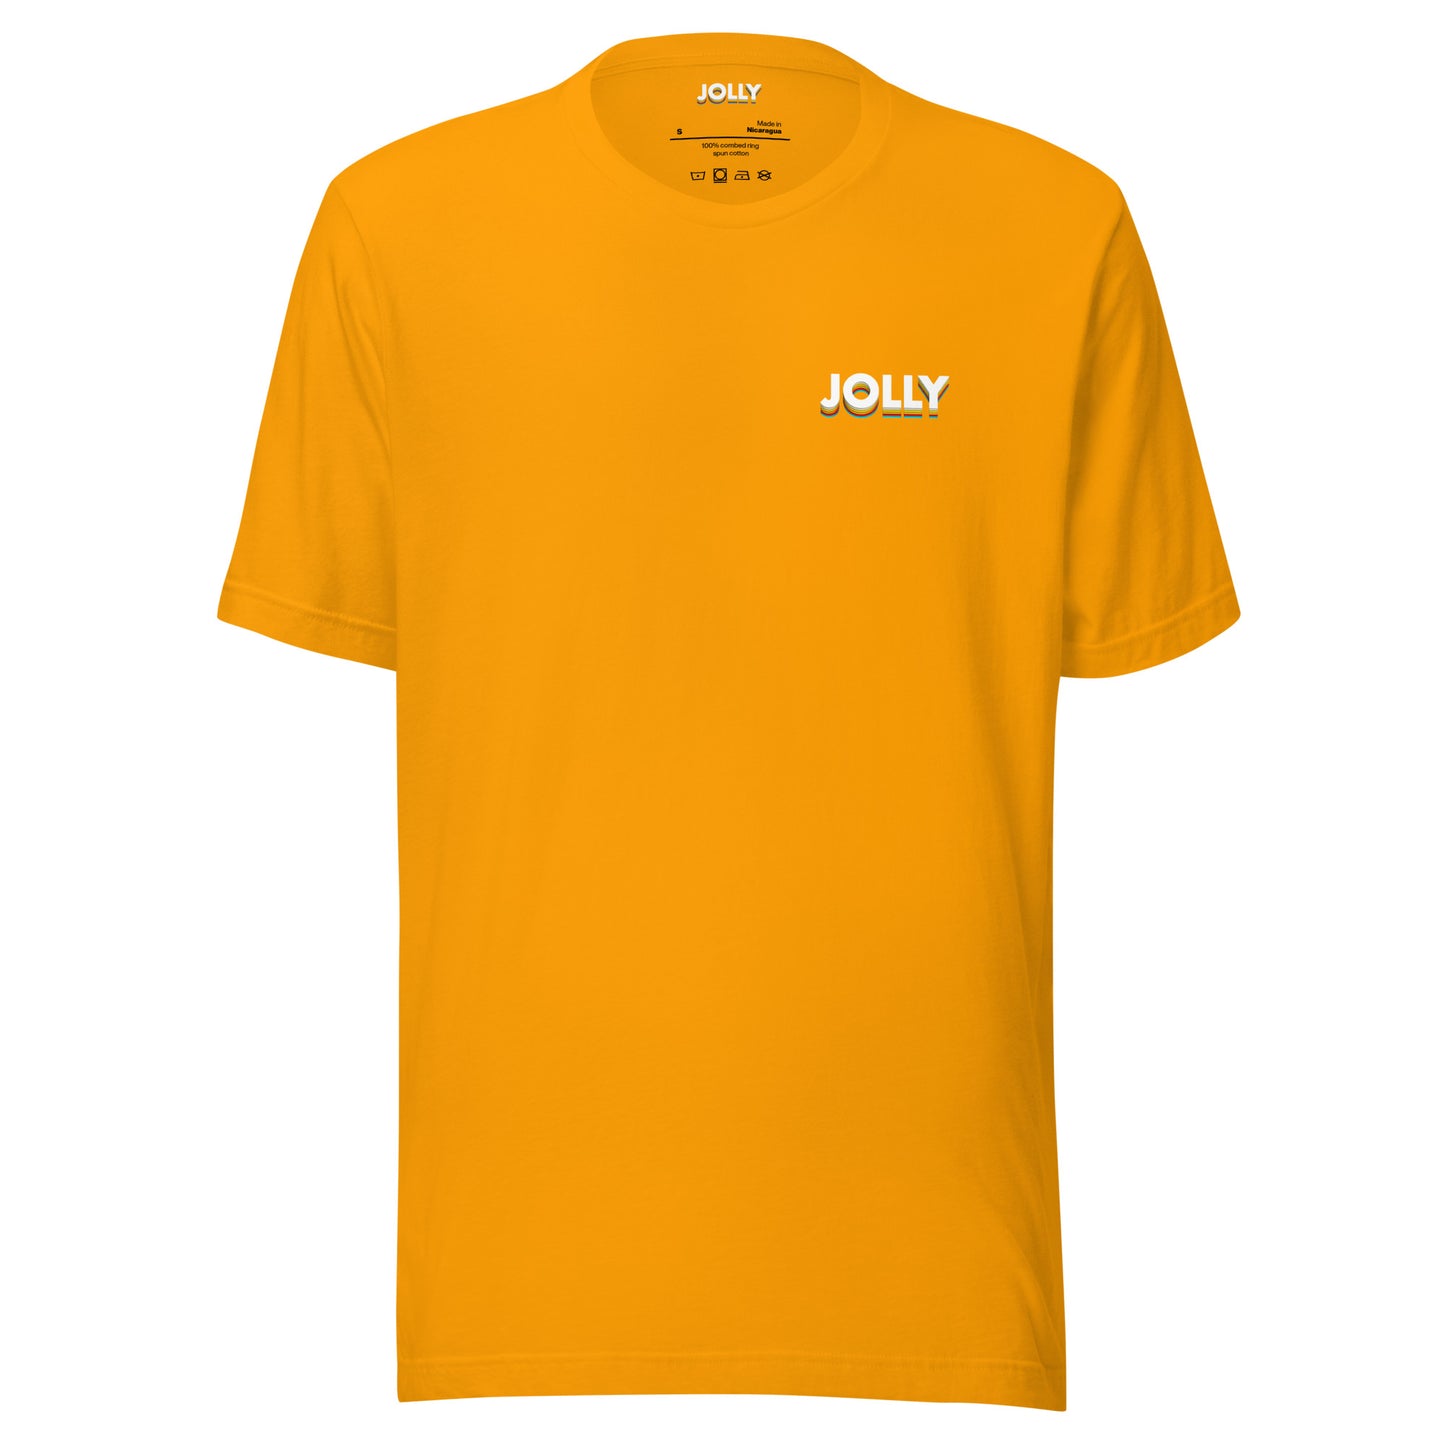 JOLLY Small Color T-Shirt